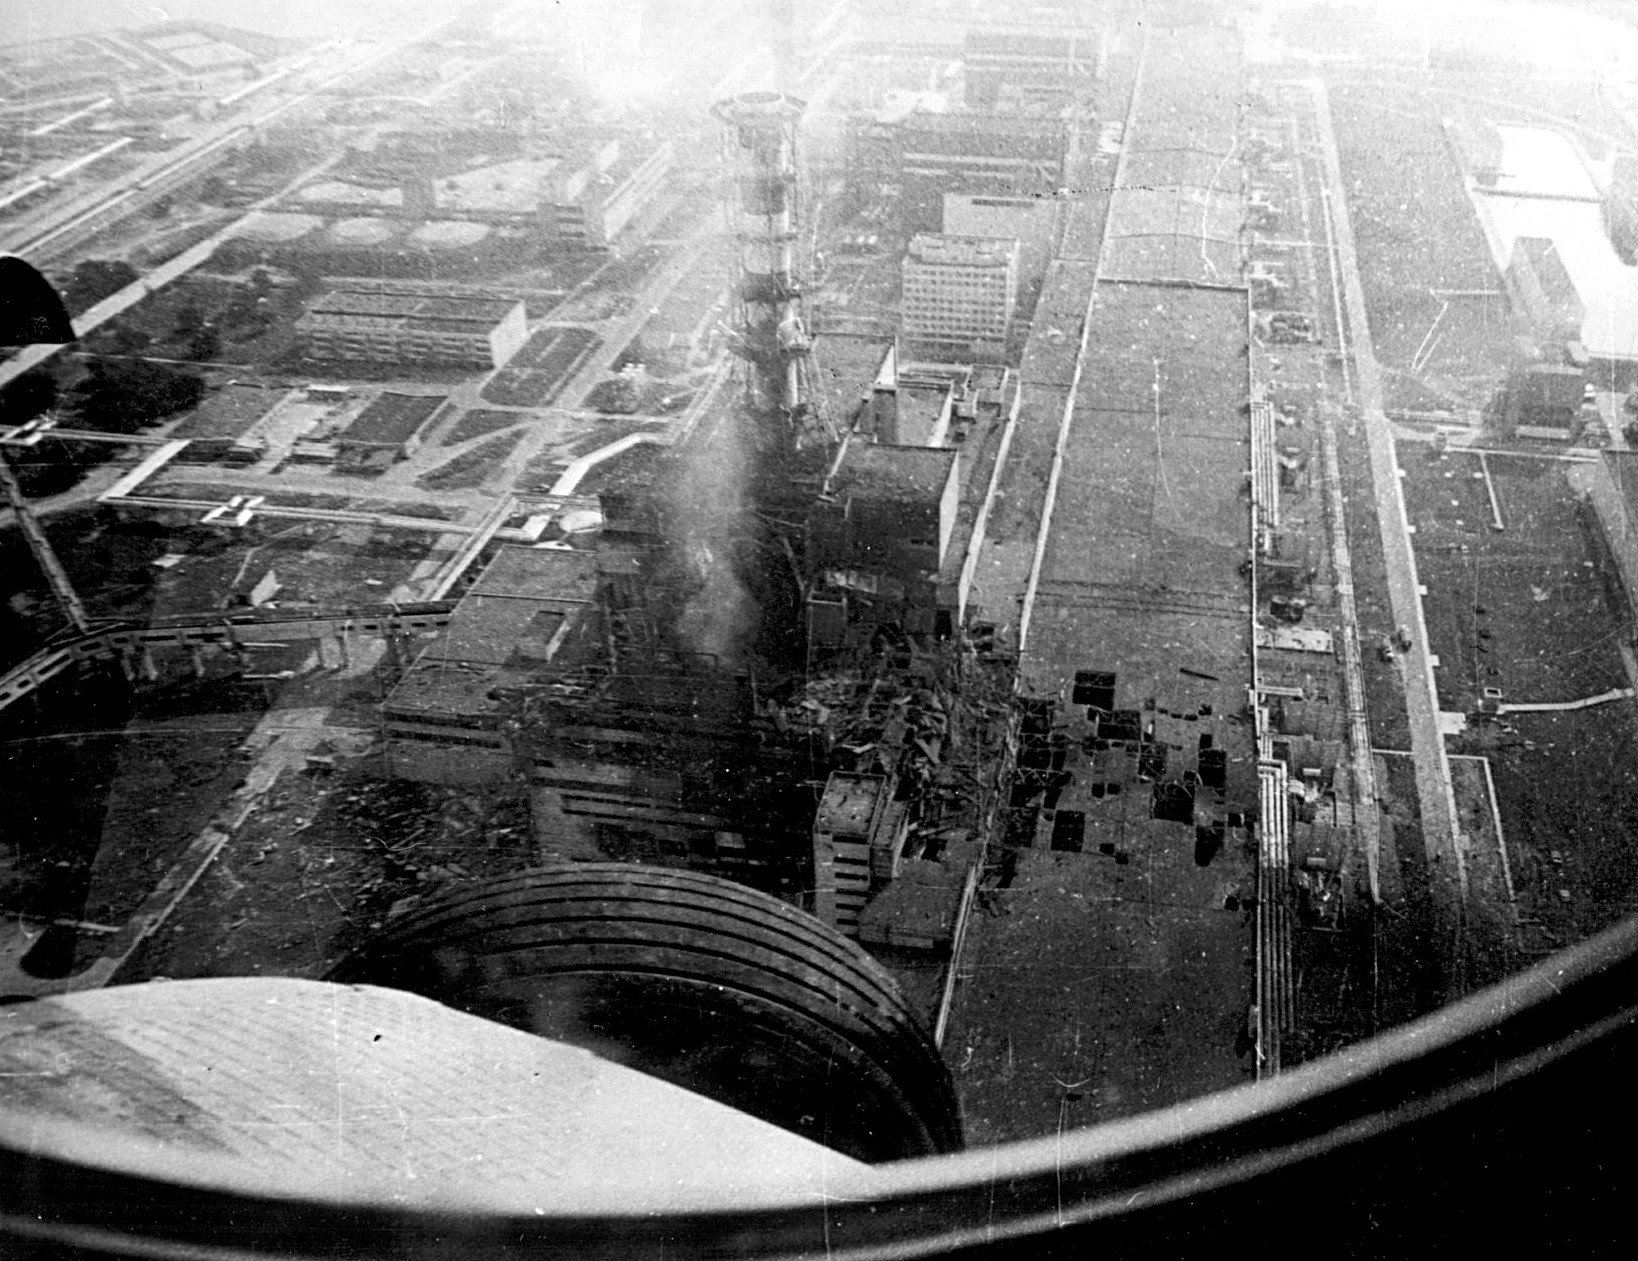 The reactor exploded in the dead of night, April 26. The most Soviet people didn't know anything about the accident until early May. 